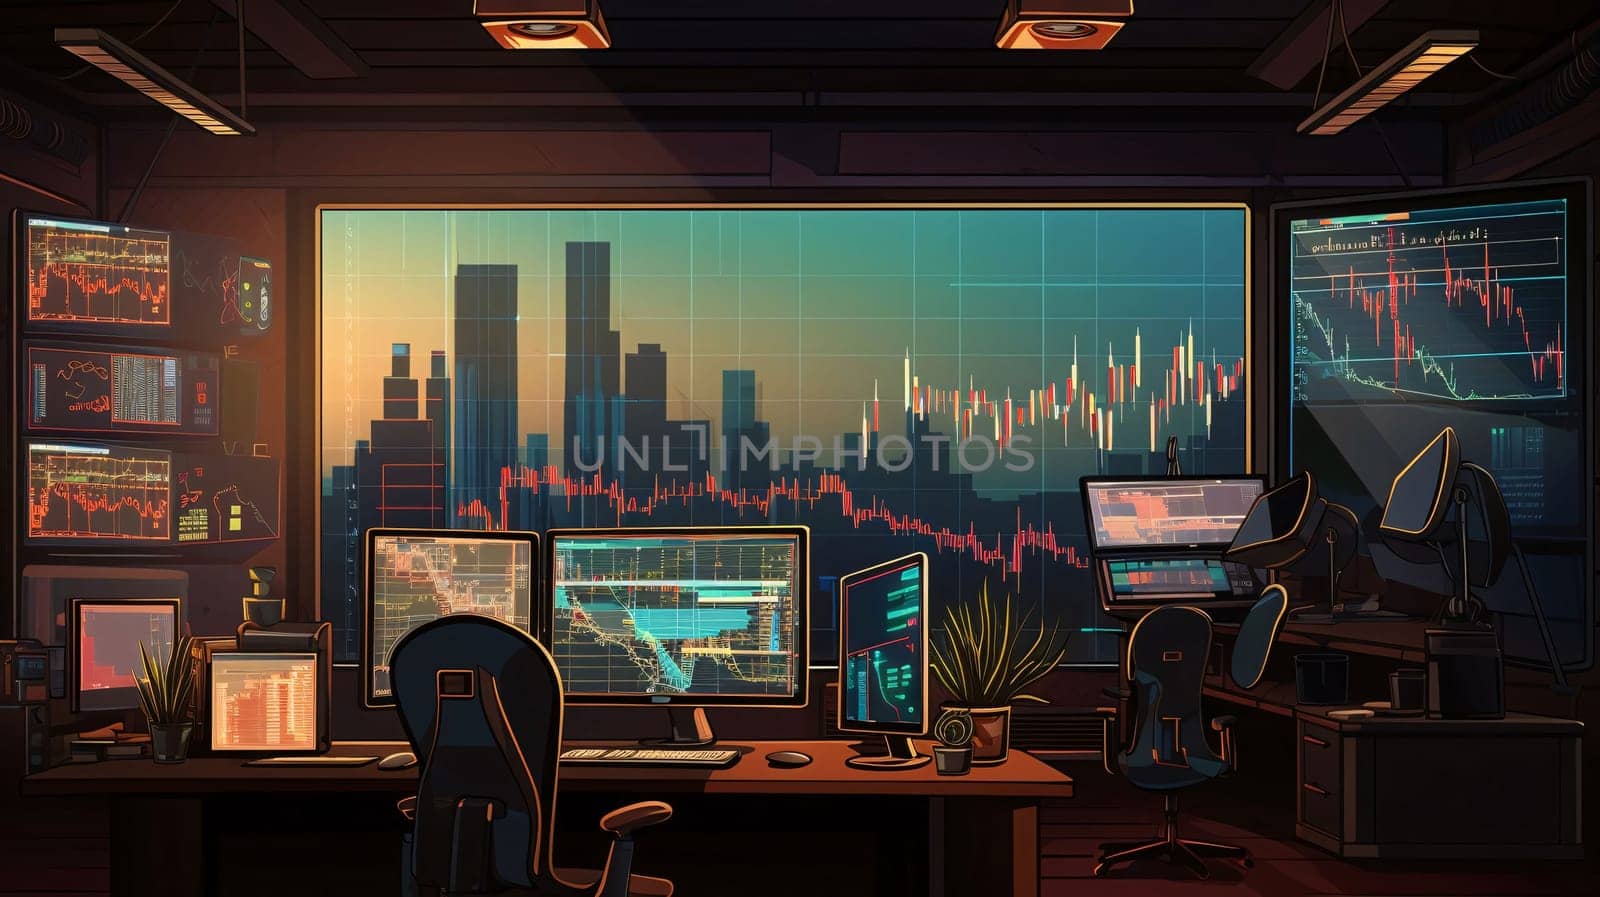 Stock Market: Illustration of a stock exchange trading room with computer monitors and monitors.